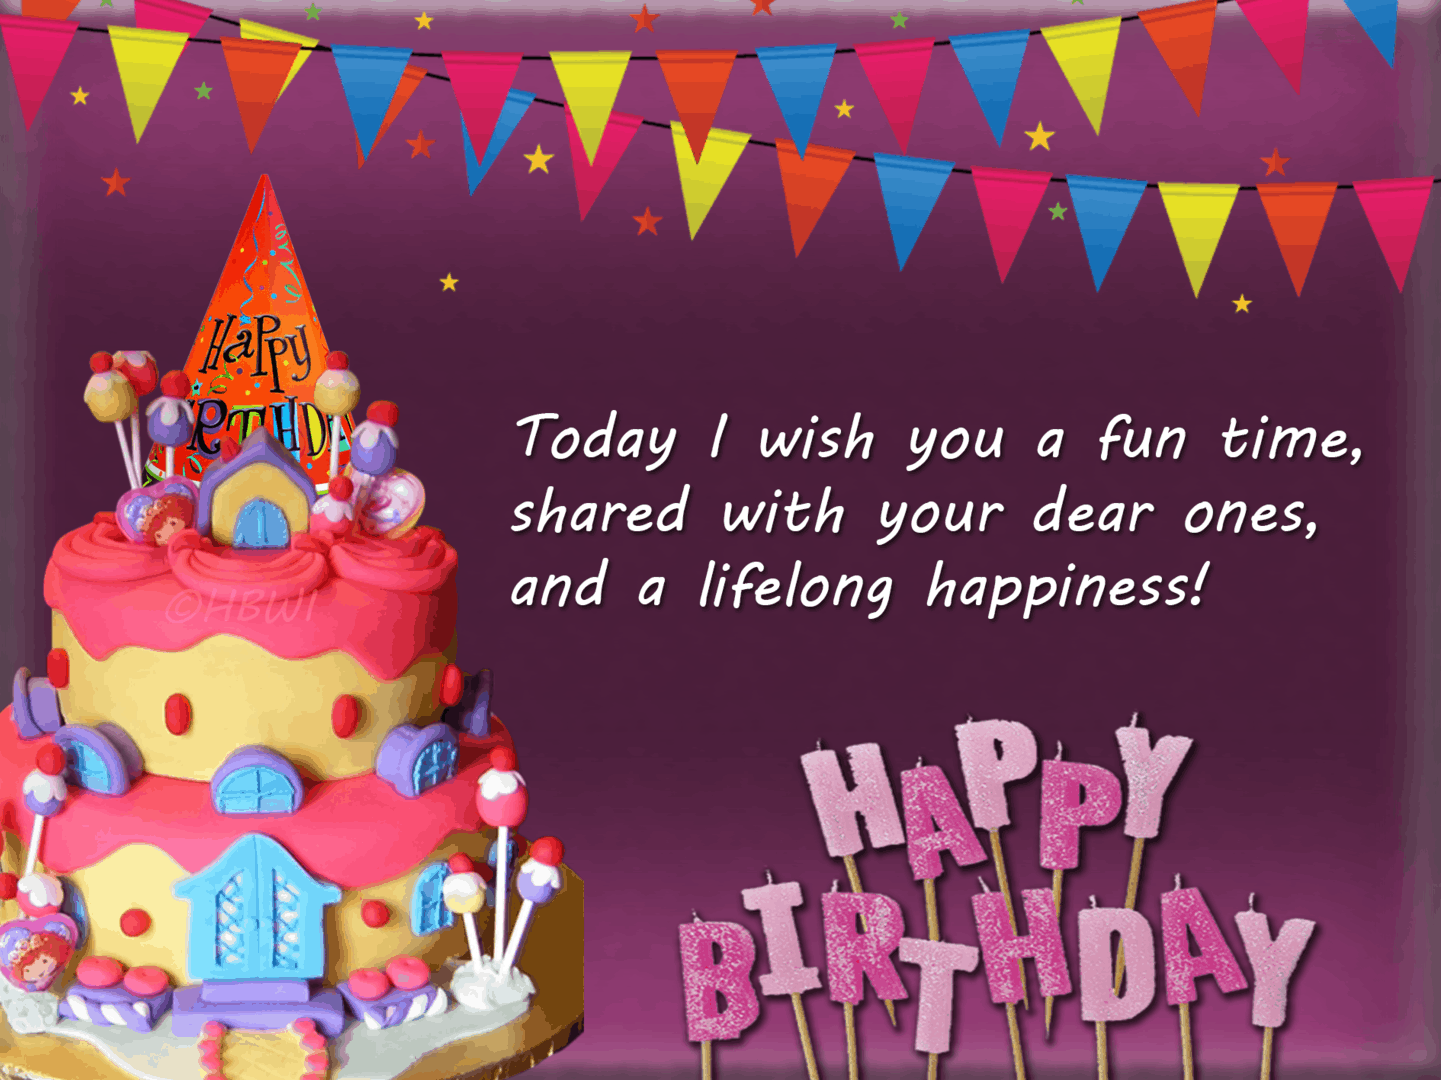 Funny and Sweet Happy Birthday Wishes - Happy Birthday to you! - Happy